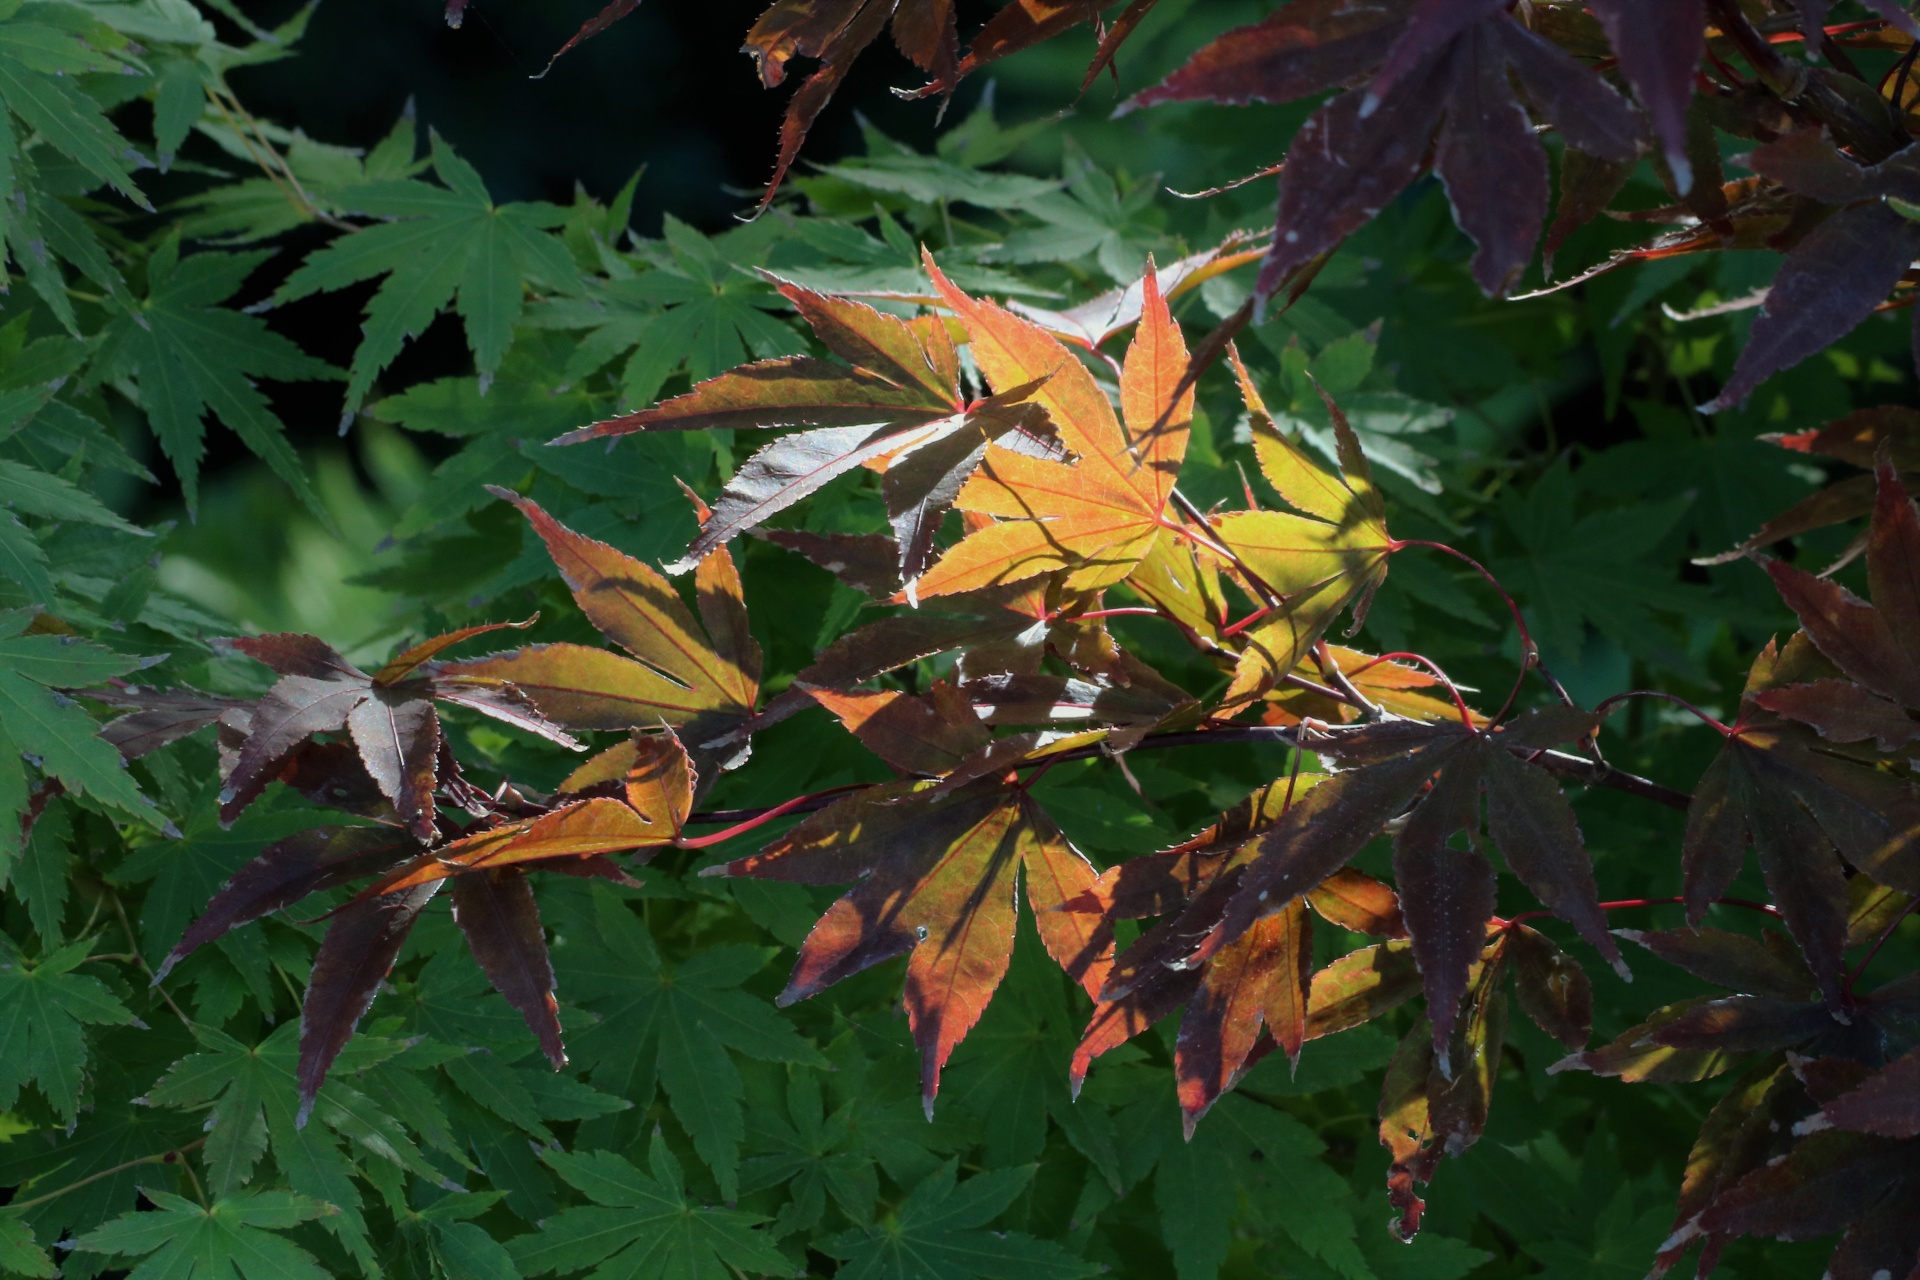 Close-up of purple and gold autumn leaves highlighted by the sun against a green leaf background.